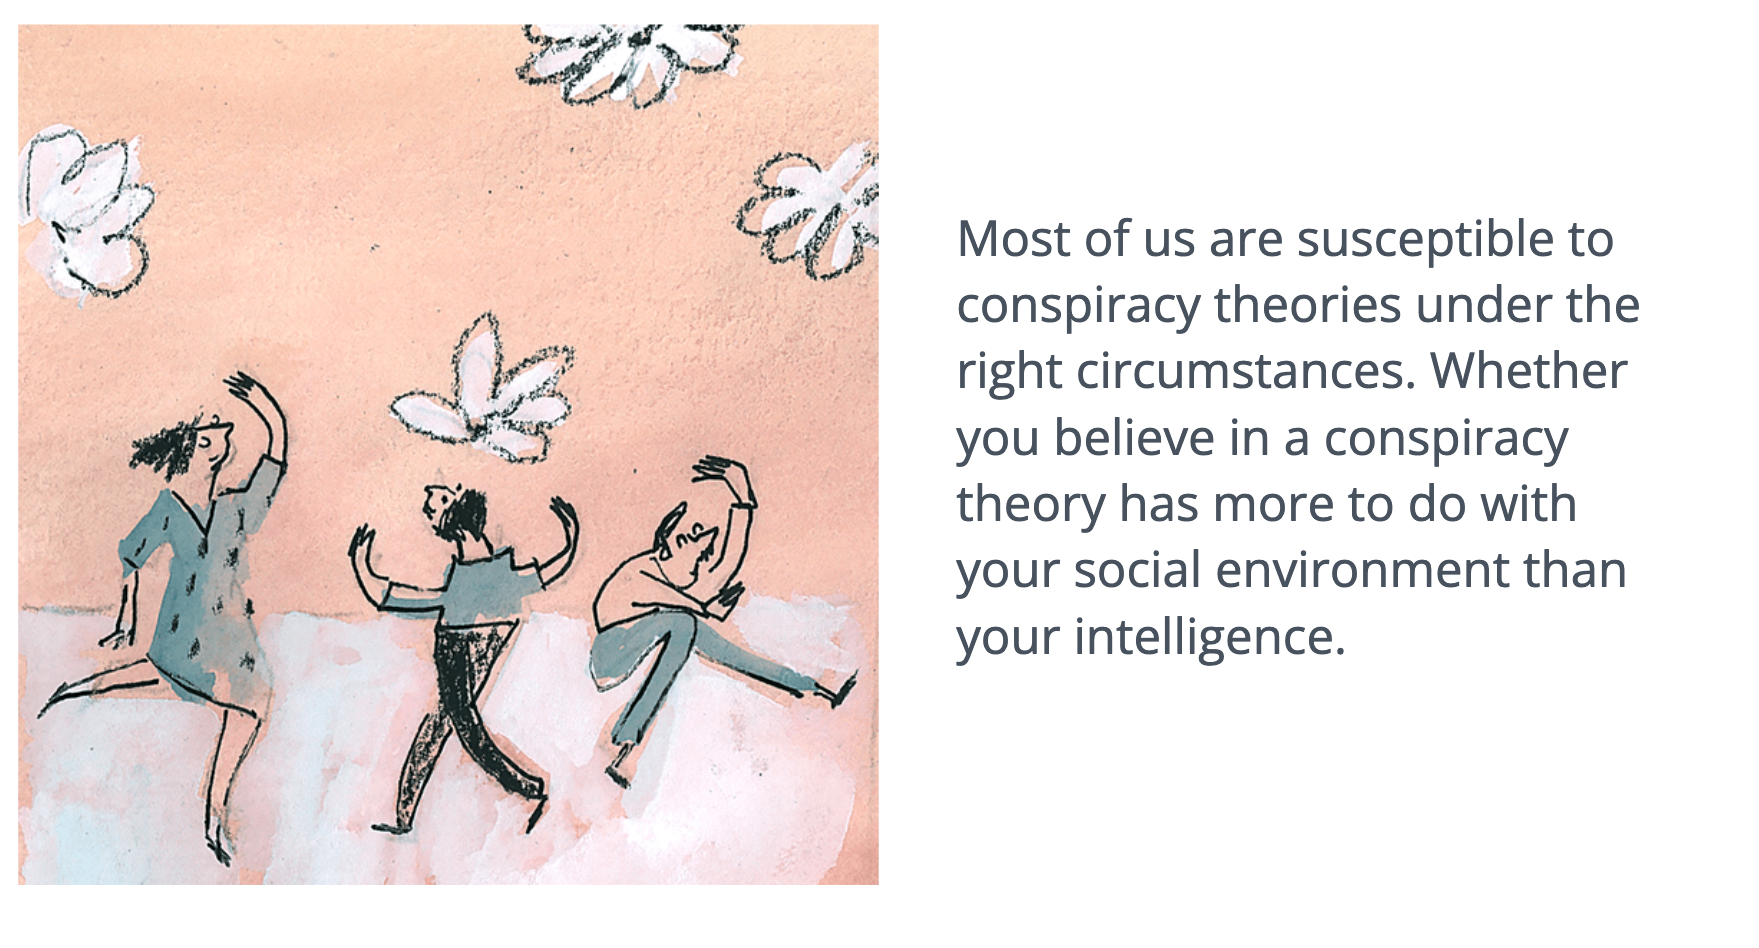 Most of us are susceptible to conspiracy theories under the right circumstances. Whether you believe in a conspiracy theory has more to do with your social environment than your intelligence.